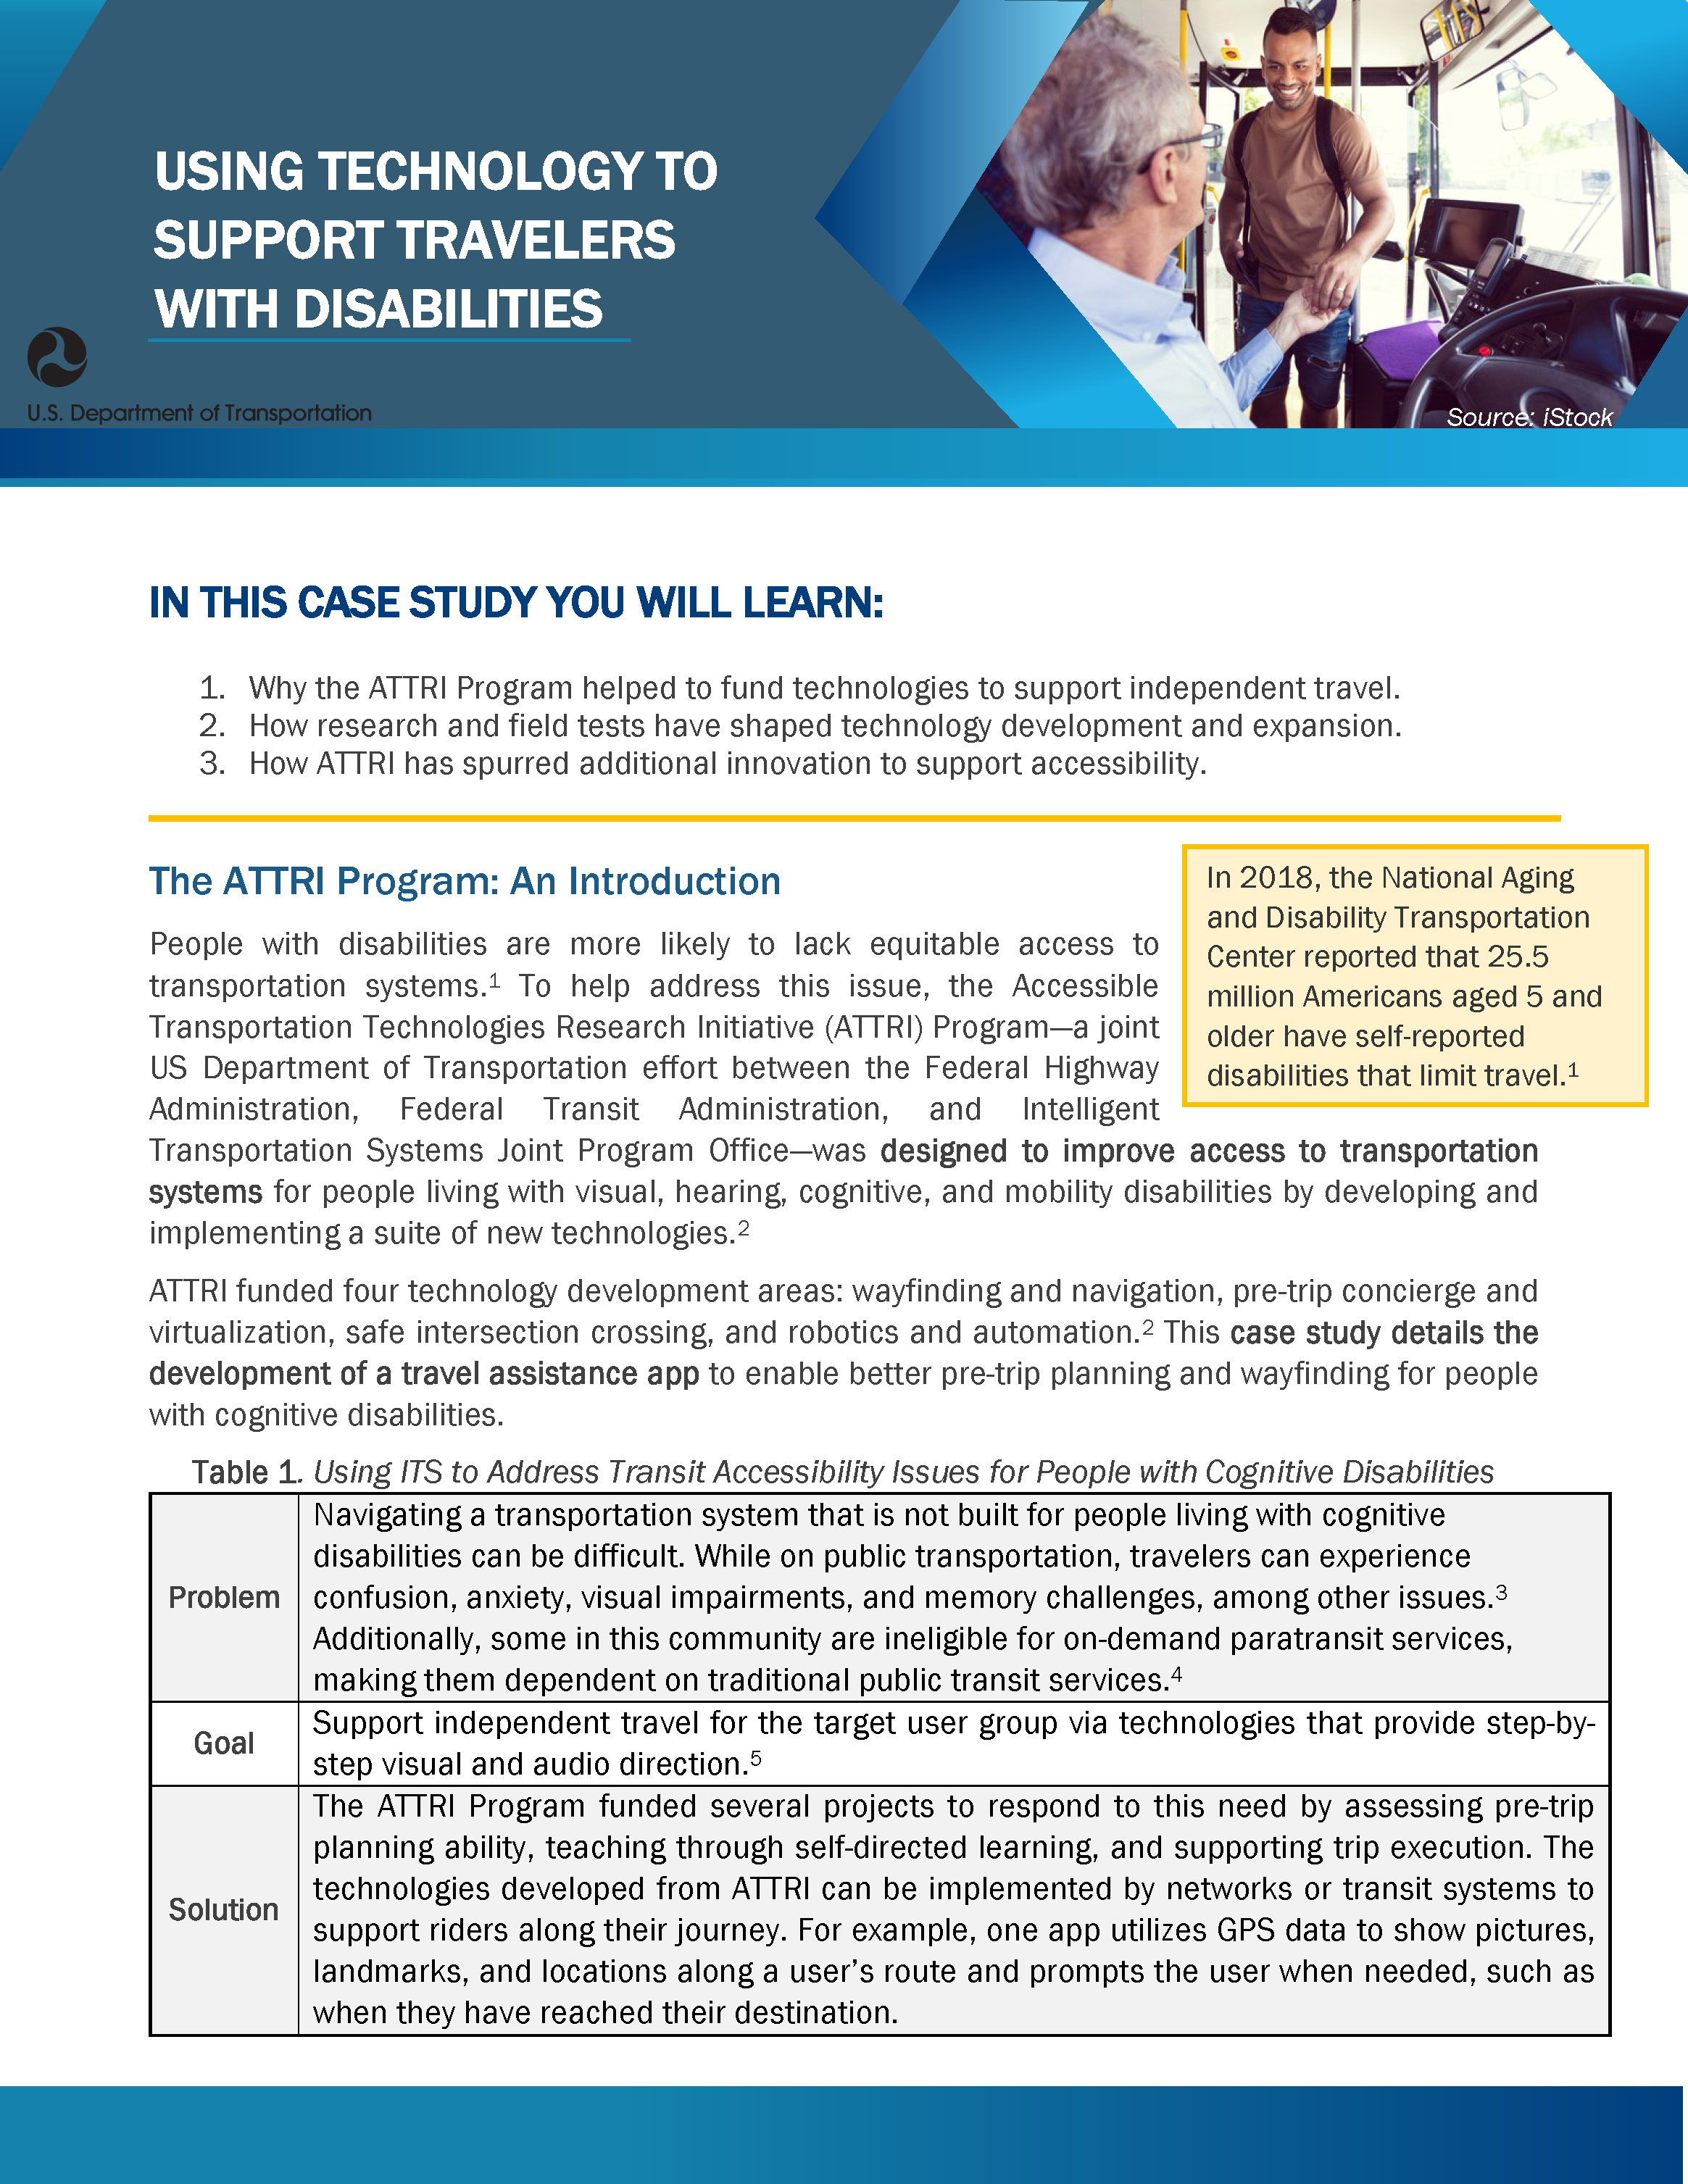 This case study discusses "Using Technology to Support Travelers with Disabilities." This image is of the first page of the case study.